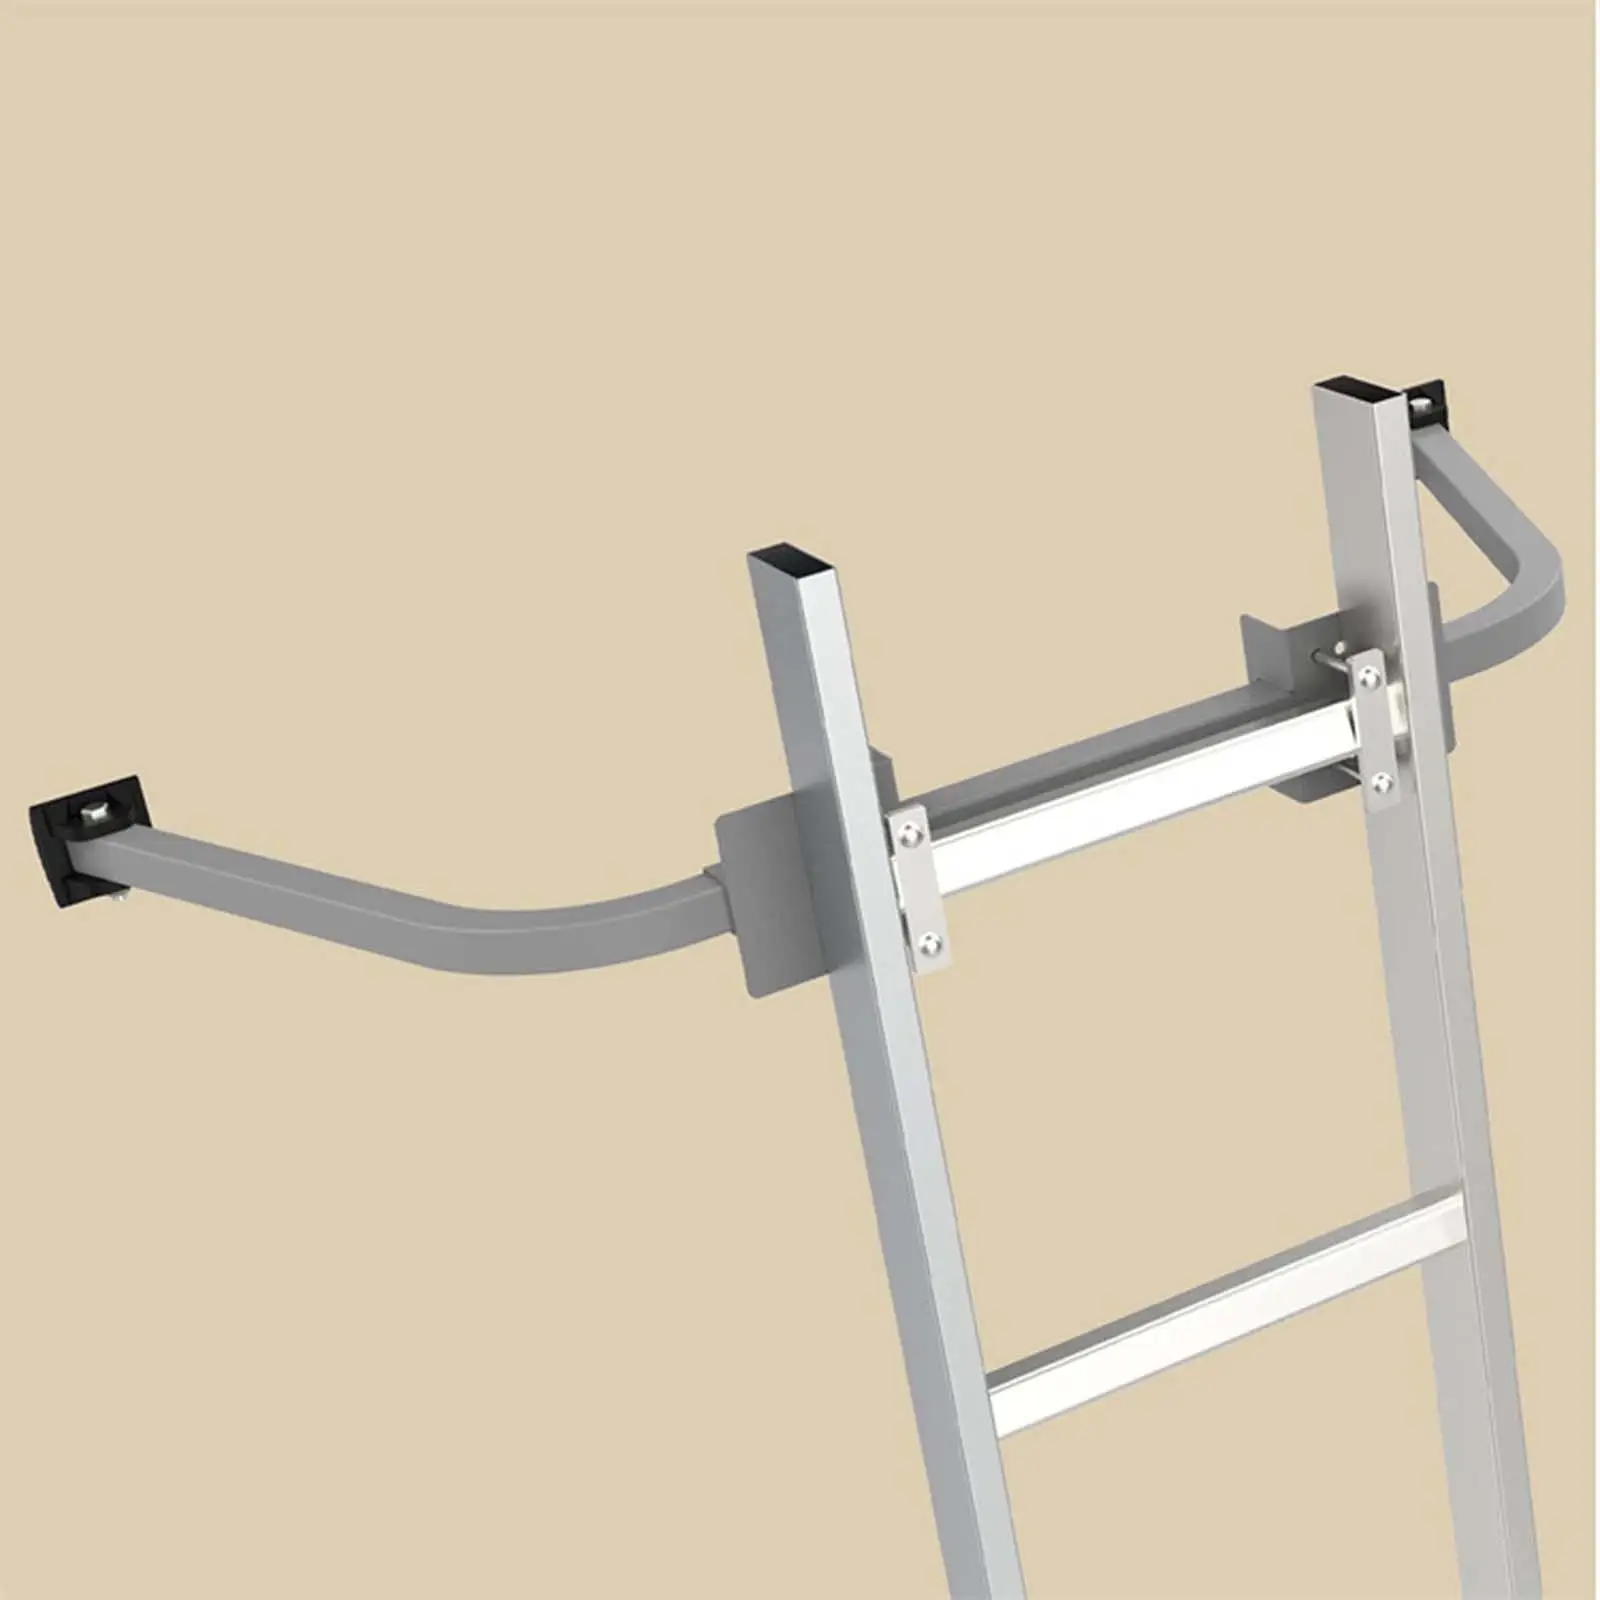 Ladder Stabilizer Portable Wall Ladder Standoff for Working Repair Projects